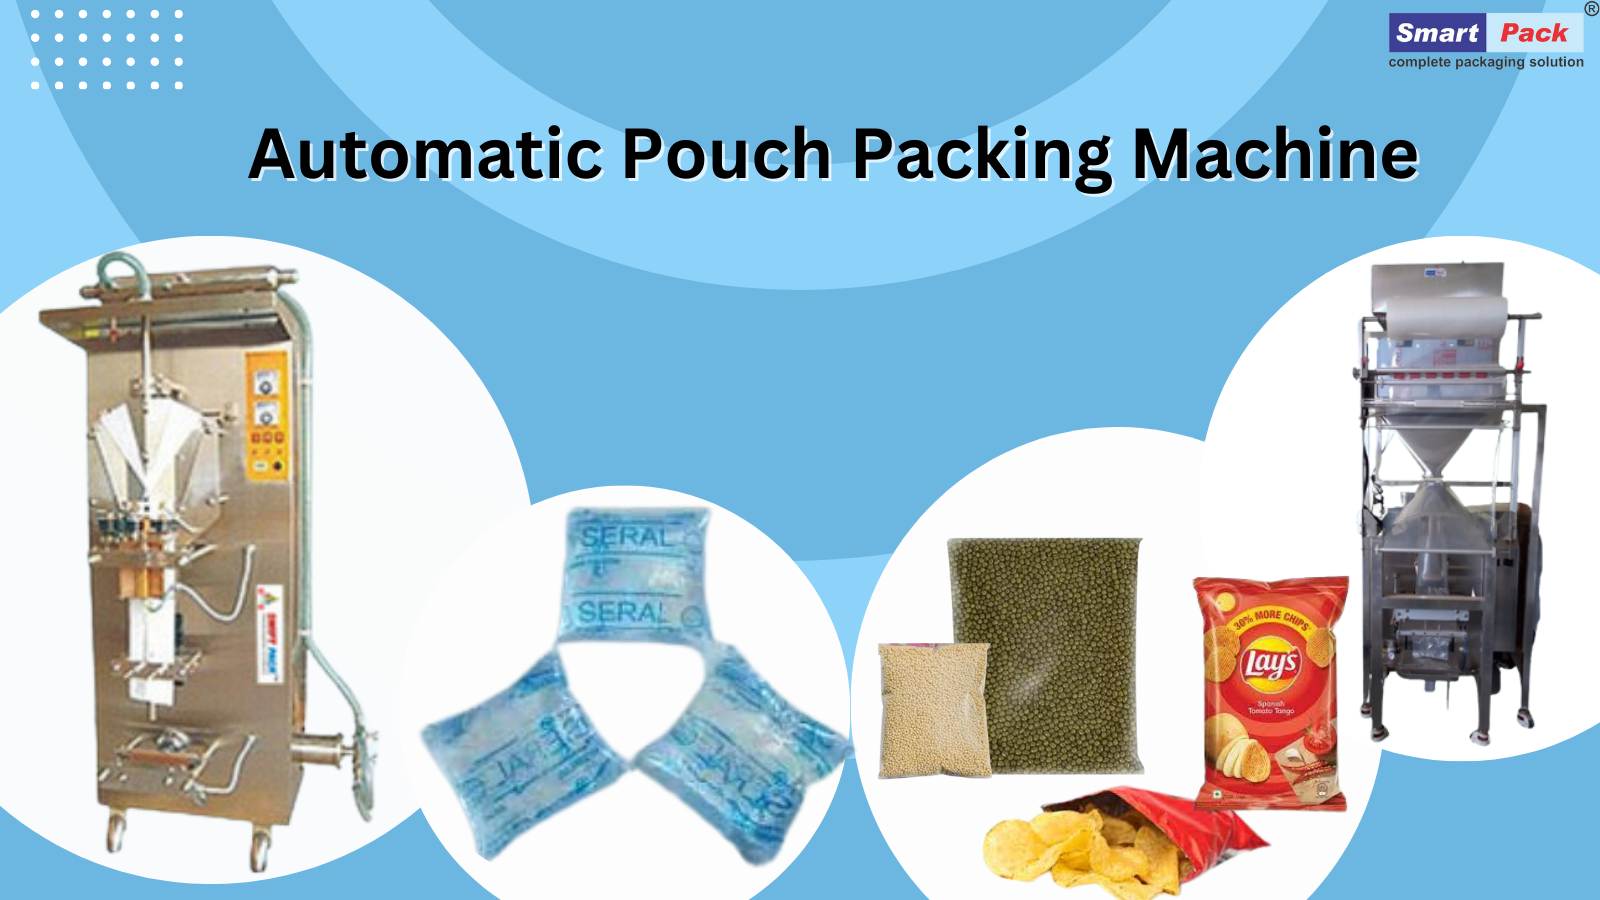 Automatic Pouch Packing